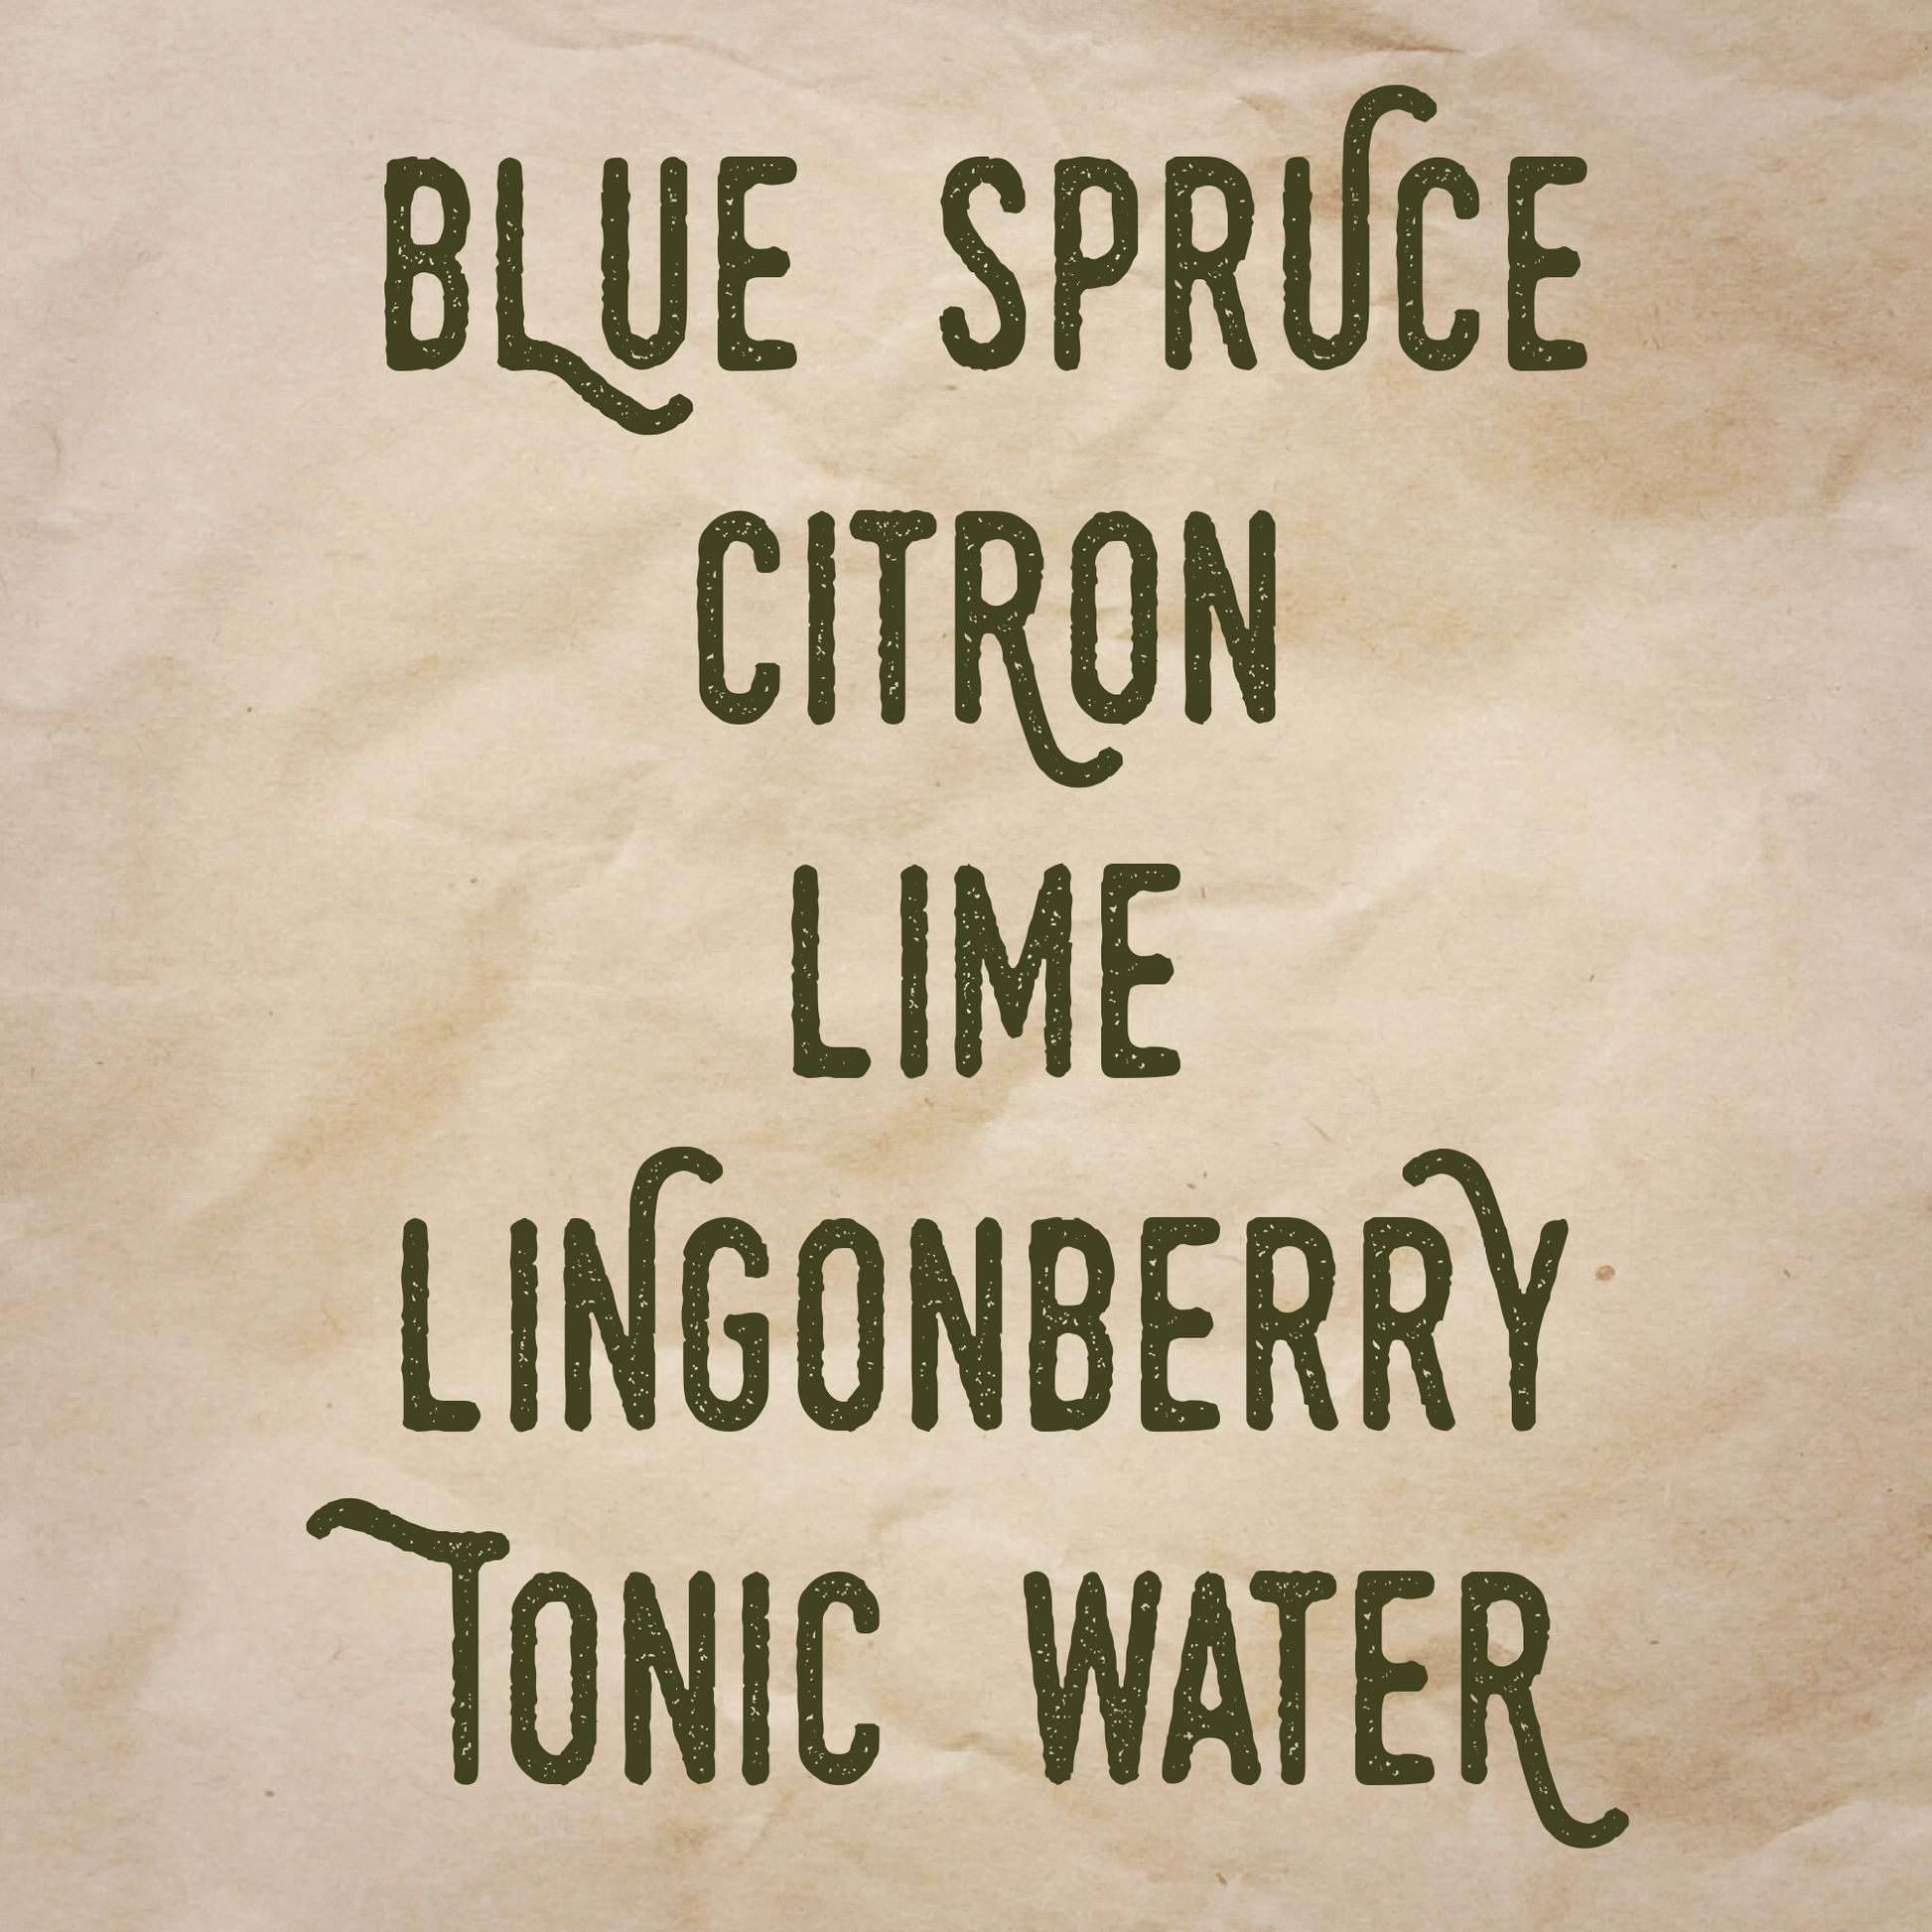 Grim and Tonic scent notes: Blue spruce, citron, lime, lingonberry, and tonic water.